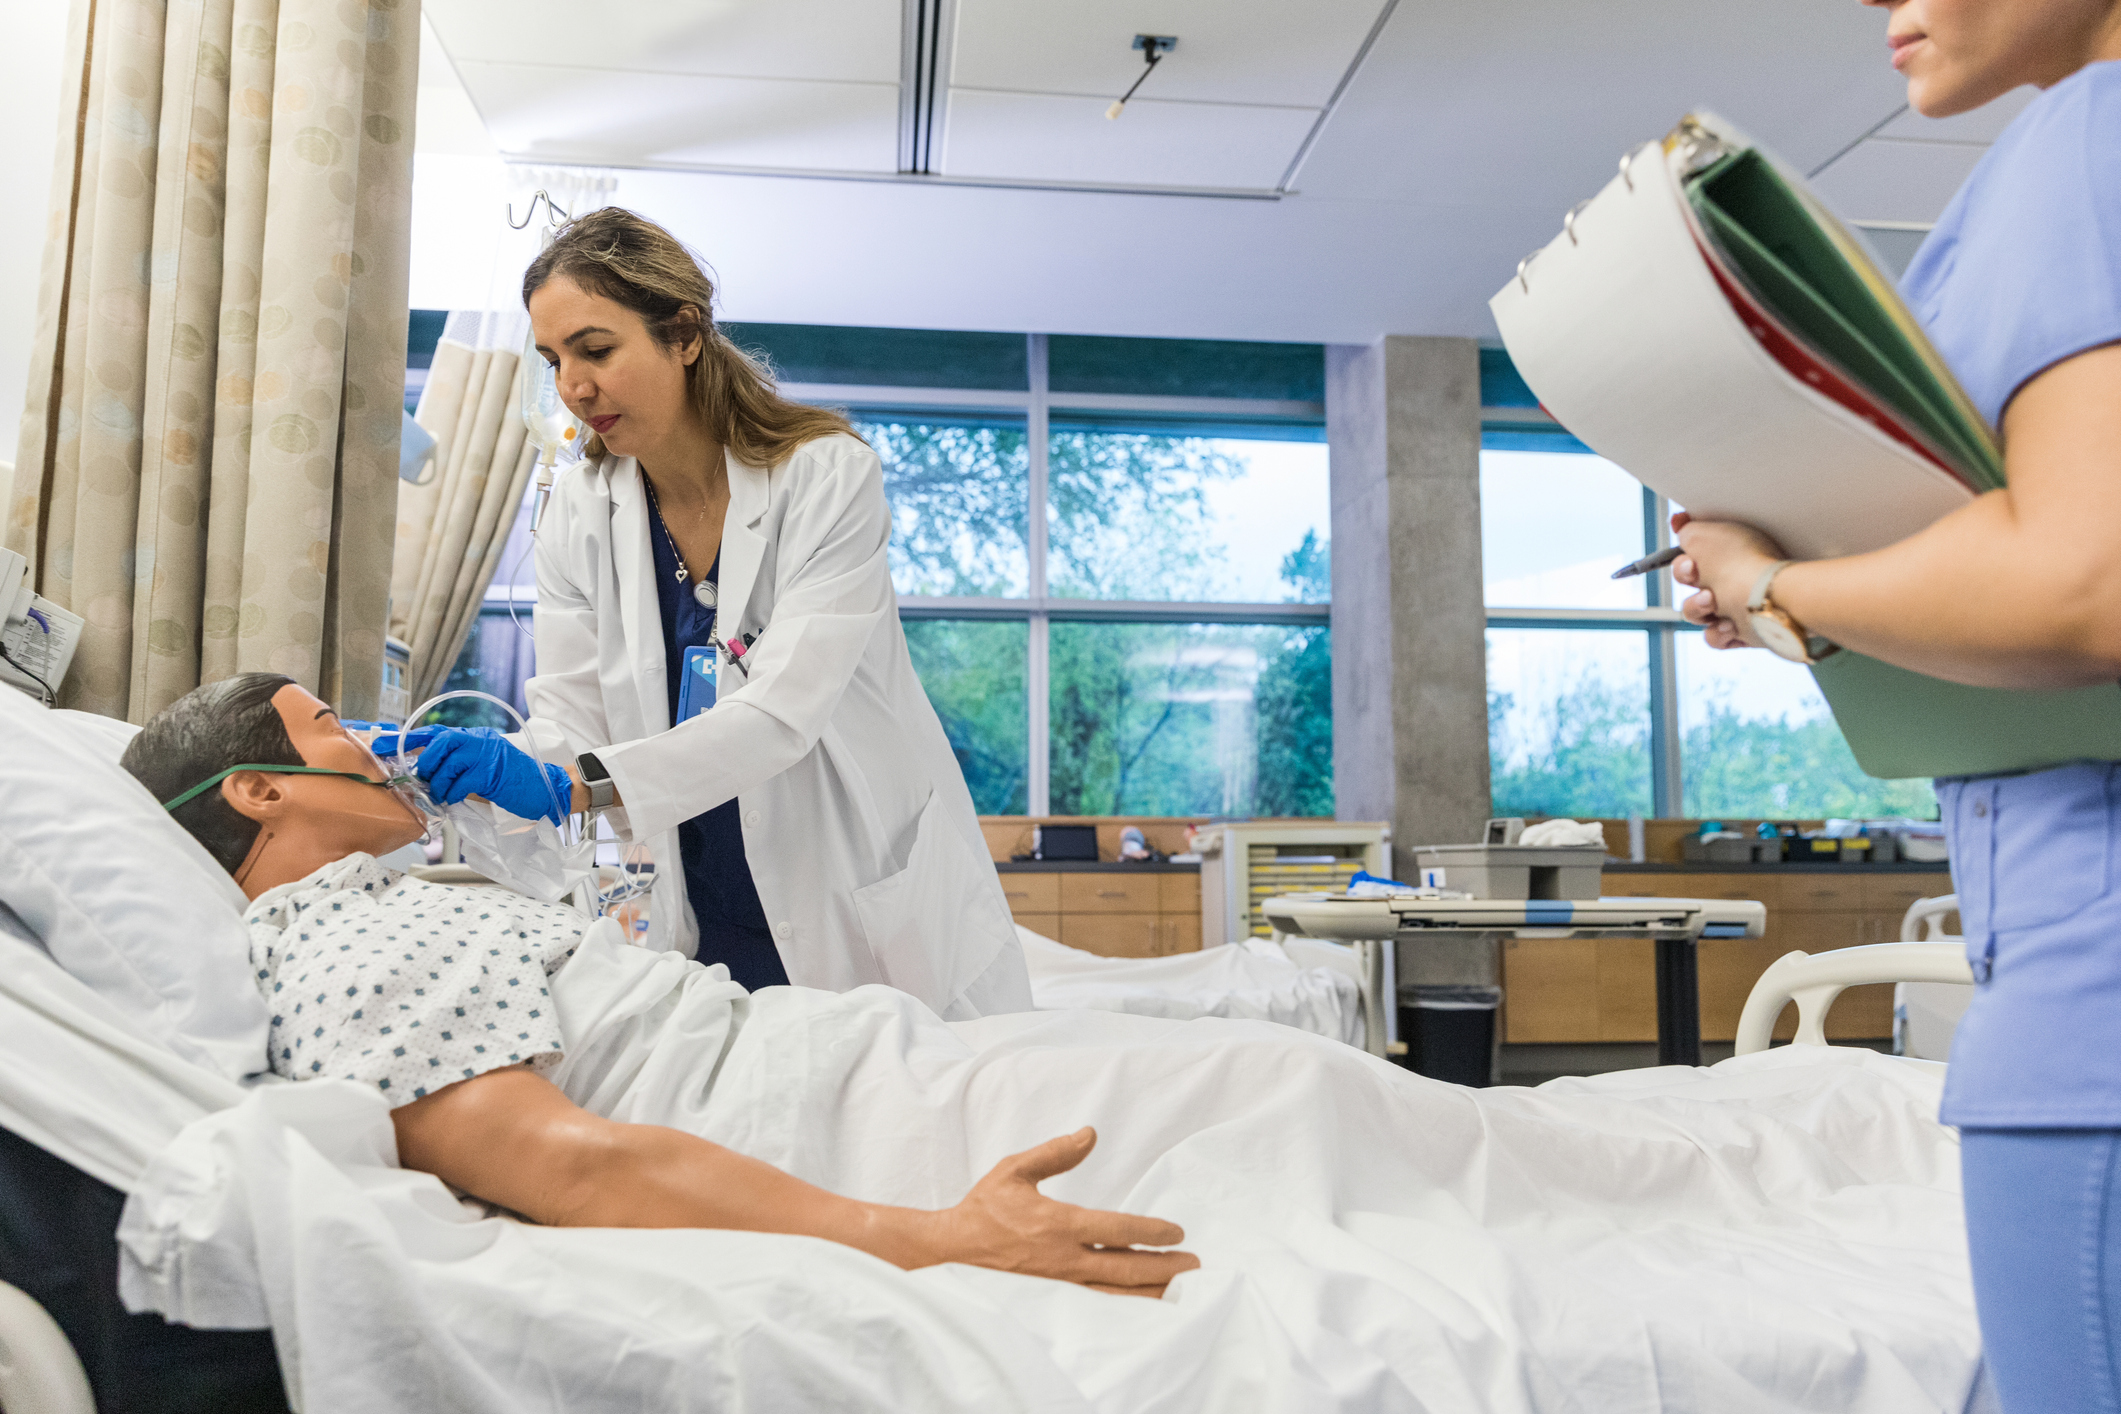 Nurse simulating patient care to a mannequin in hospital bed